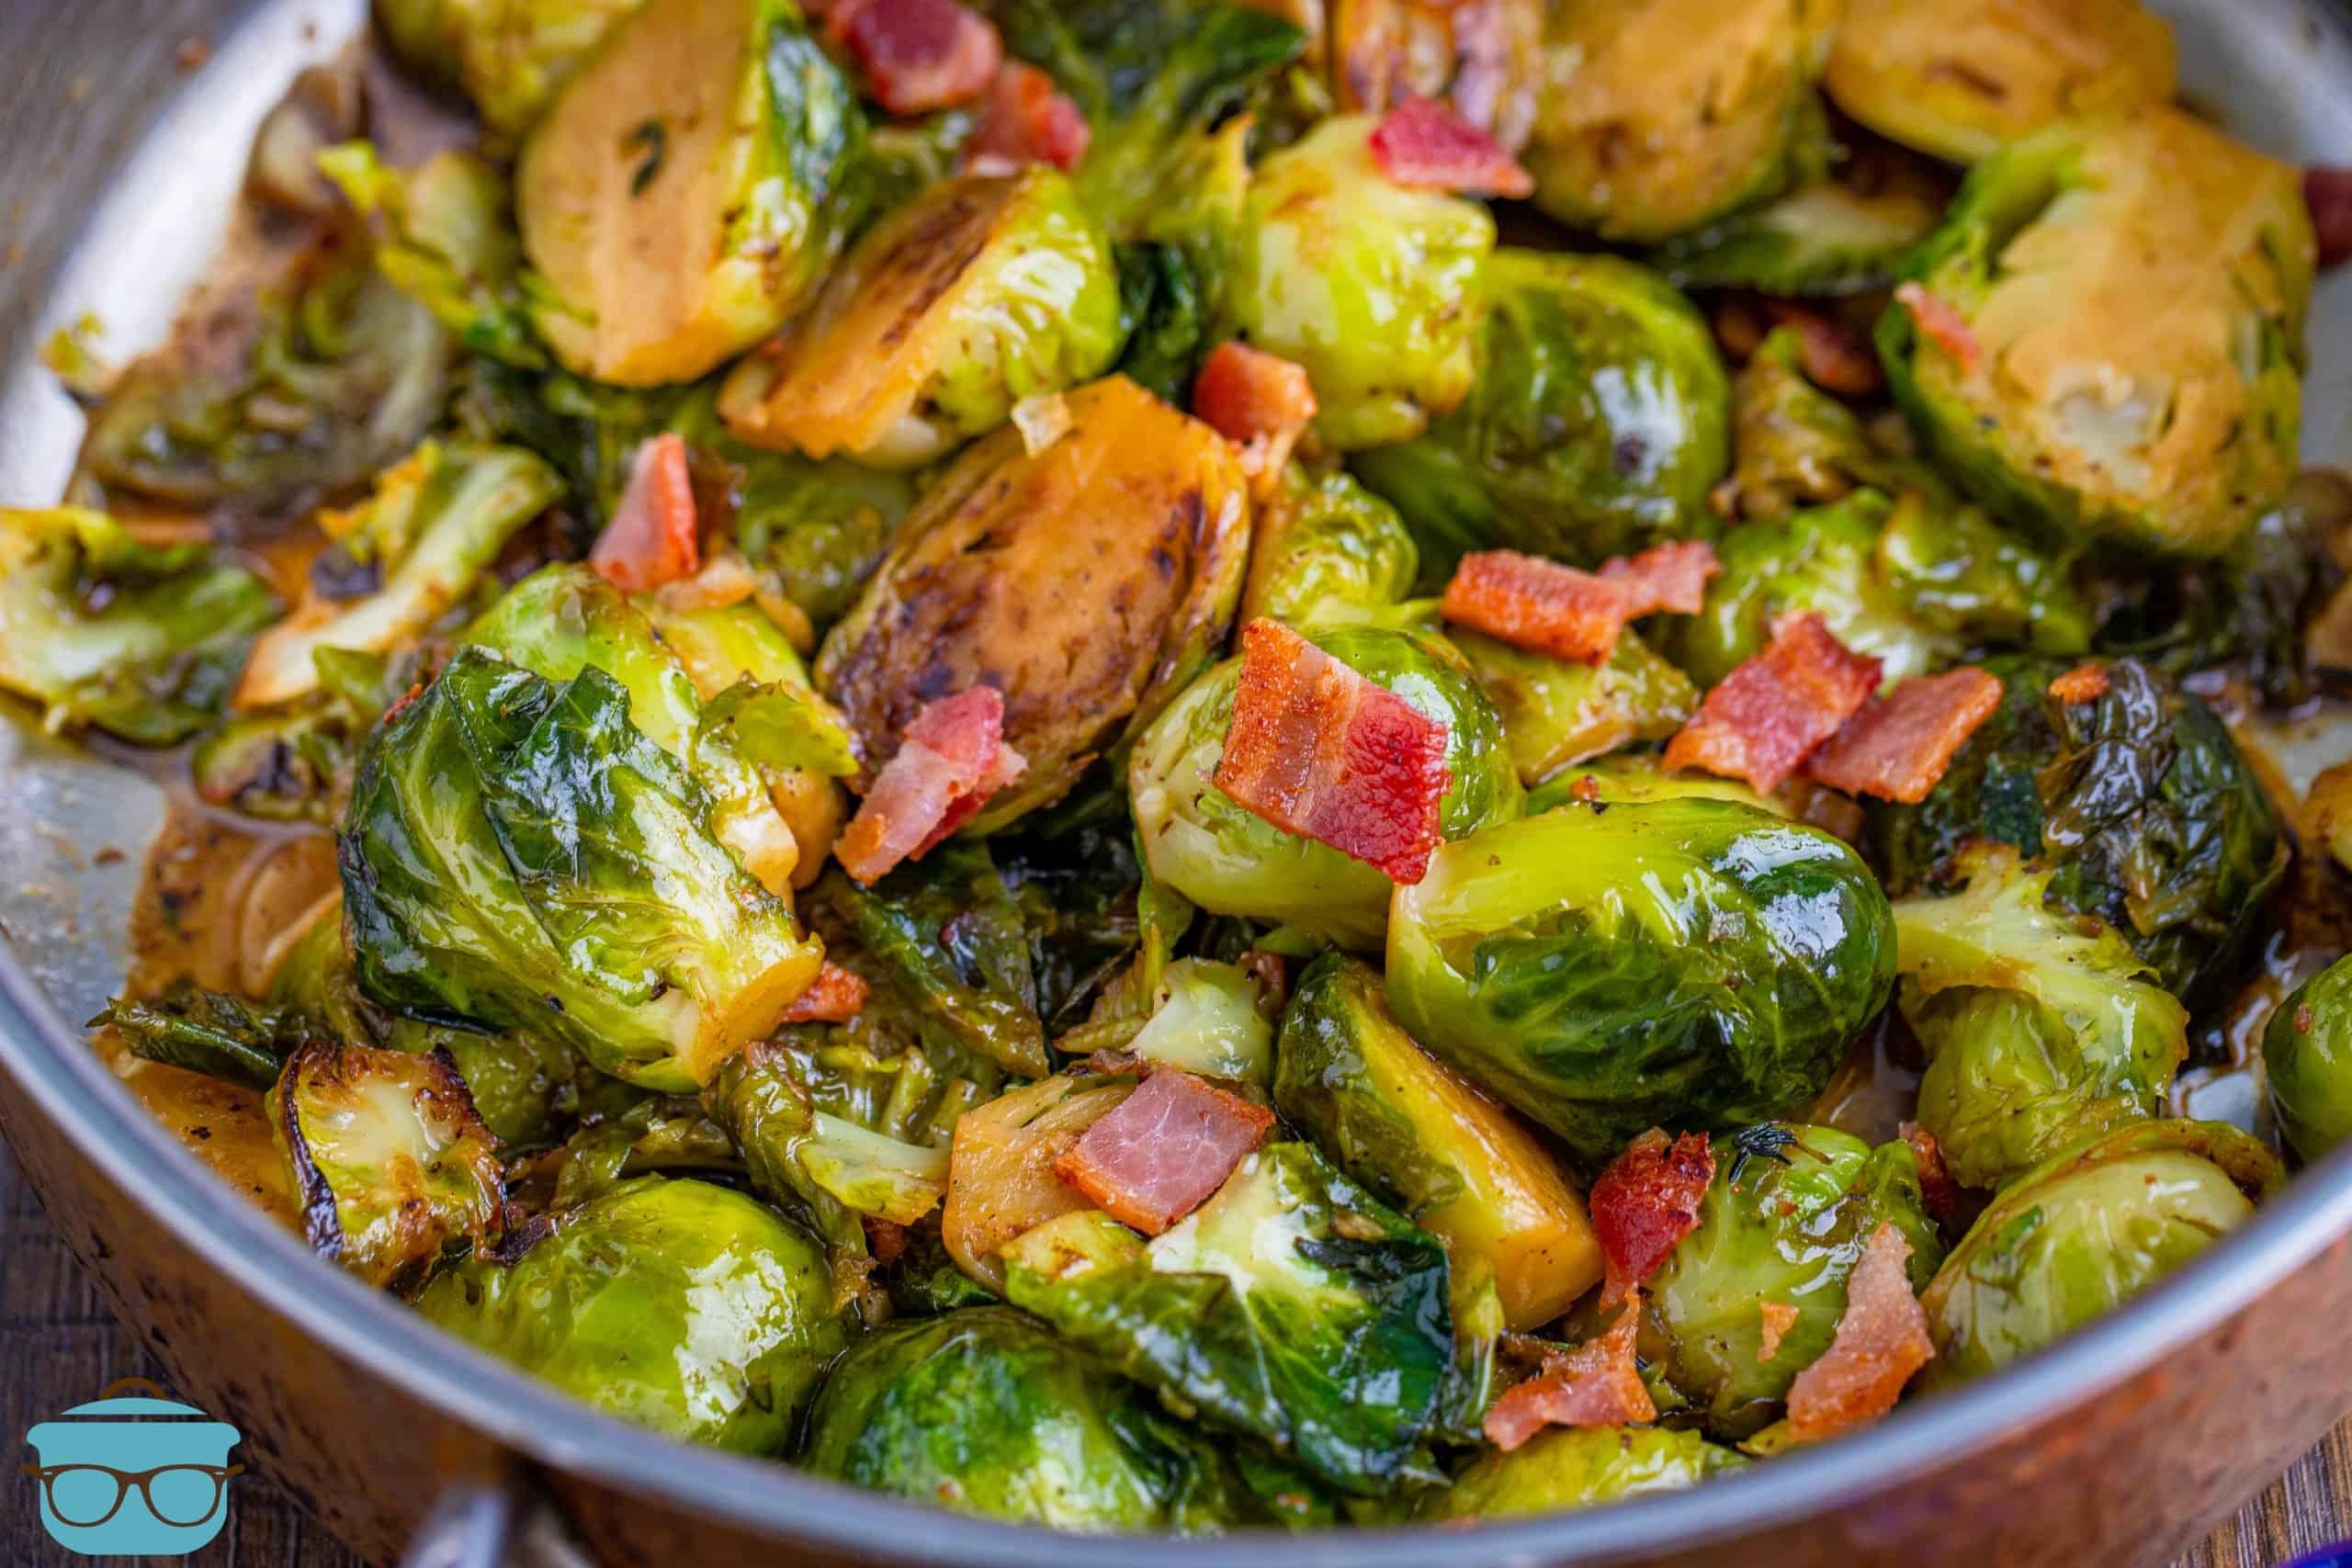 Stovetop Brussel Sprouts with Bacon shown in a silver frying pan.